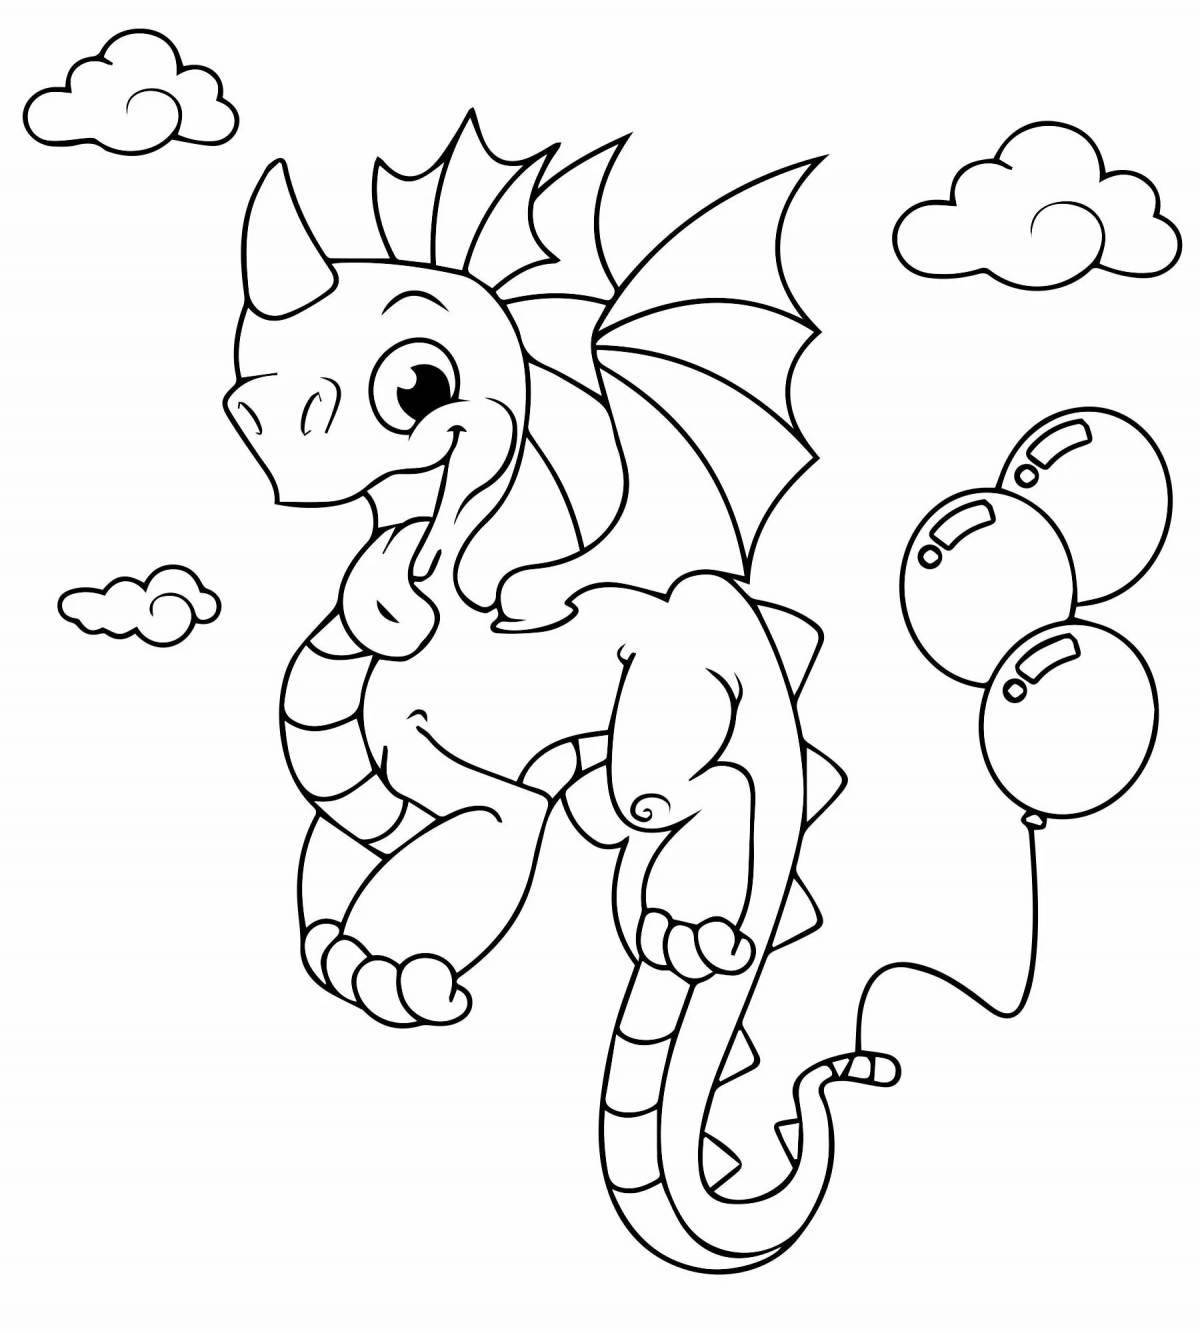 Wonderful coloring dragons for children 6-7 years old